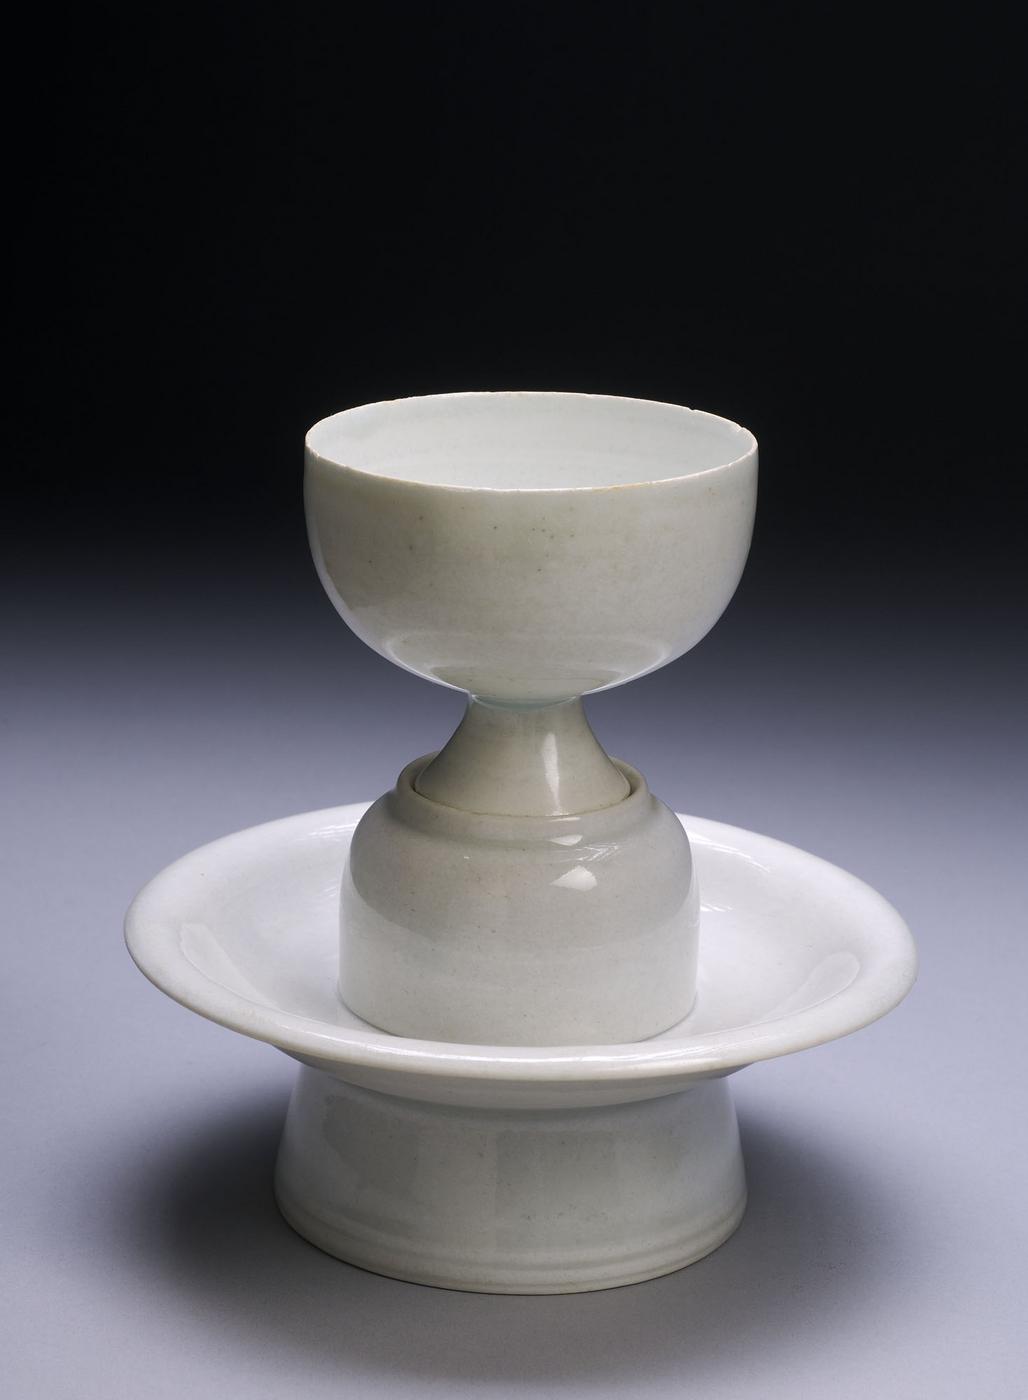 Photograph of 12-13th century white porcelain cup on a pedestal from the Song dynasty.